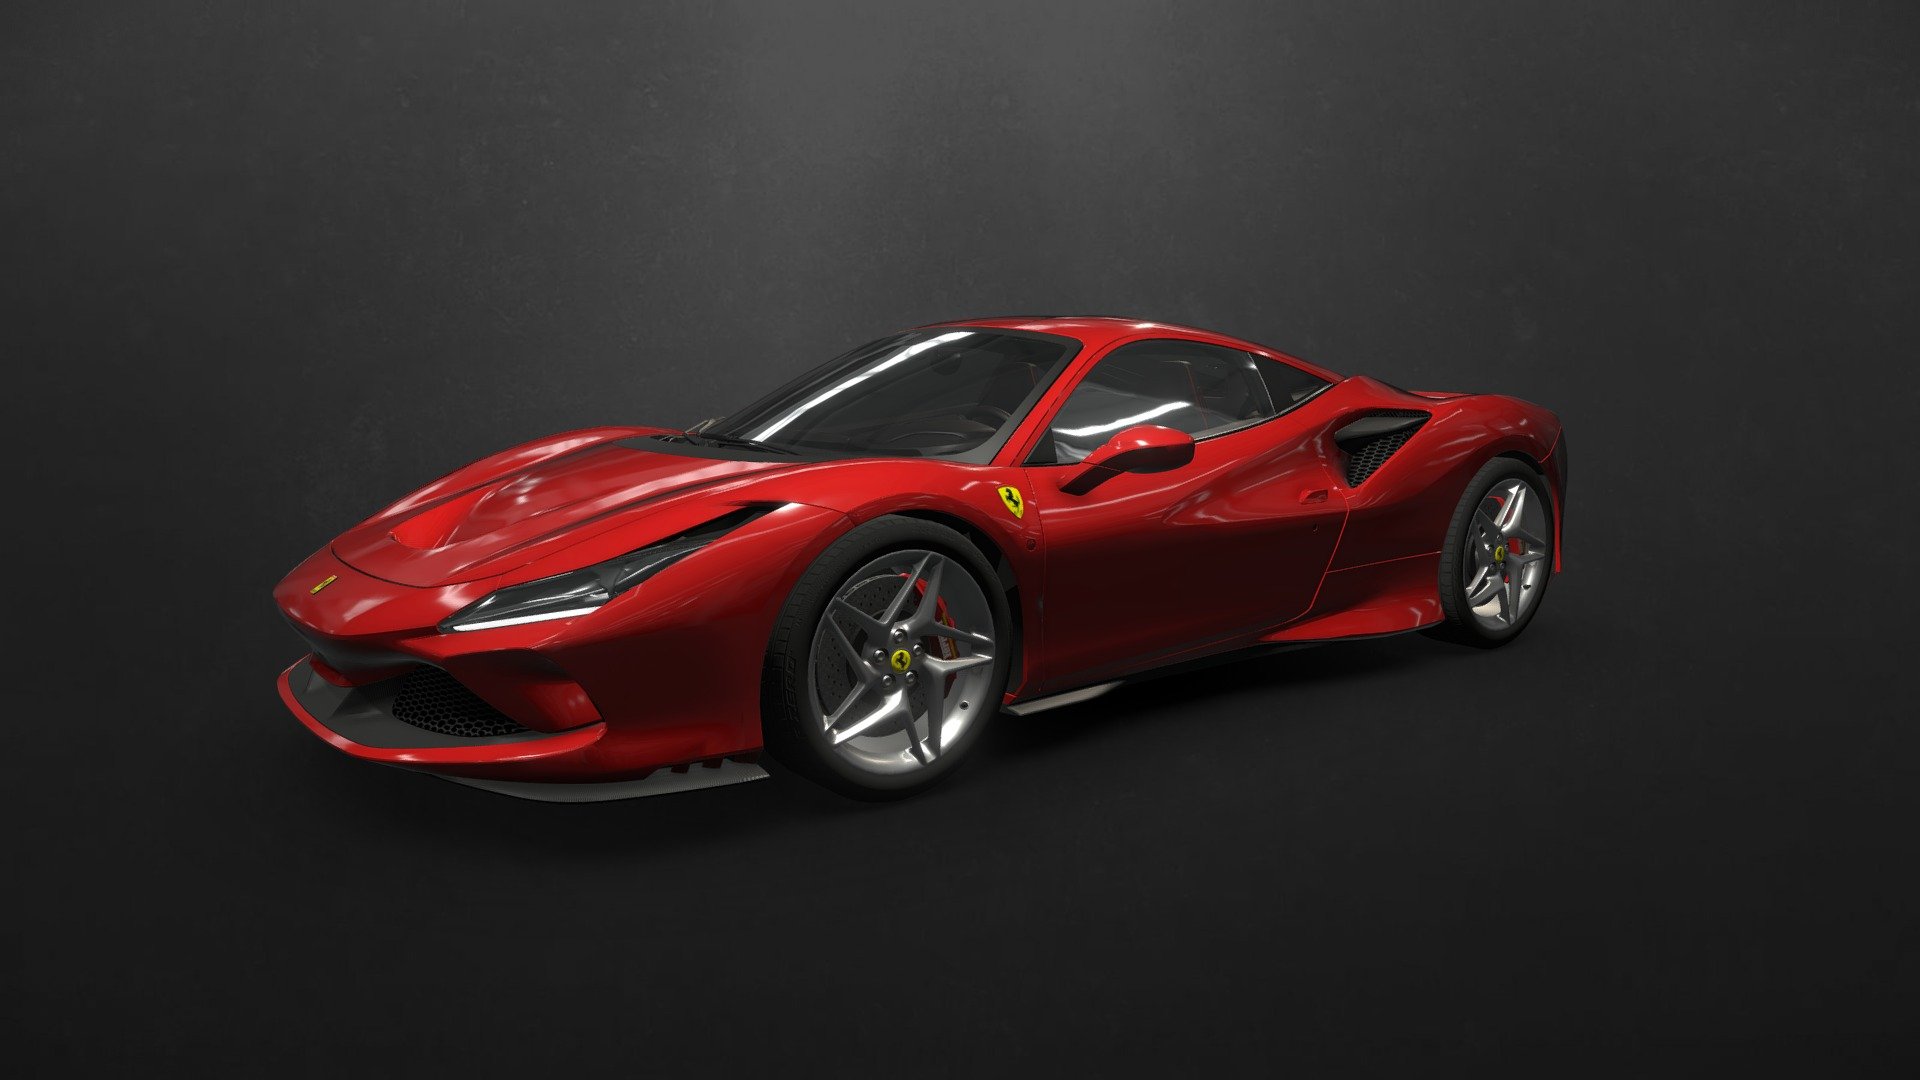 found this model here and could not find any other versions with a good scene set up. The model itself had to have edges sorted out for shading artifacts , other than that this is just a practice of using sketchfab settings to make something look good , model found here :

https://sketchfab.com/3d-models/ferrari-f8-tributo-ffa777049b1e48c1b508c6b632322eda - 2020 Ferrari F8 Tributo forked - 3D model by shaderbytes 3d model